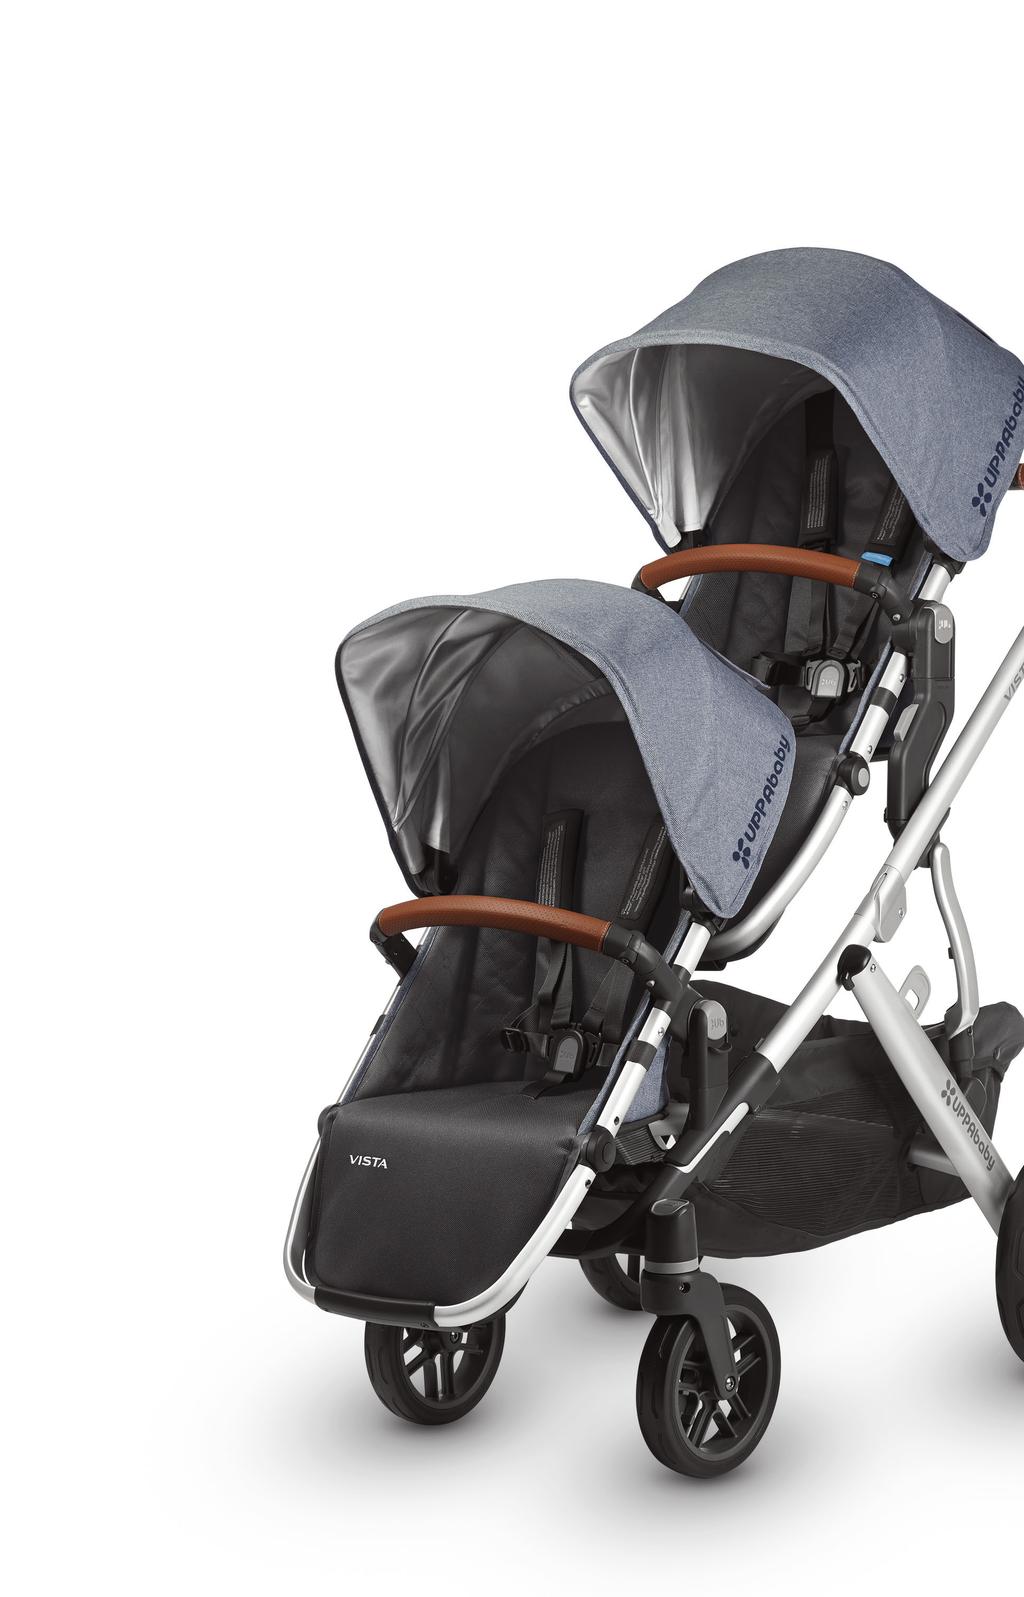 RumbleSeat USA UPPAbaby, 276 Weymouth Street, Rockland, MA 02370 uppababy.com 1.844.823.